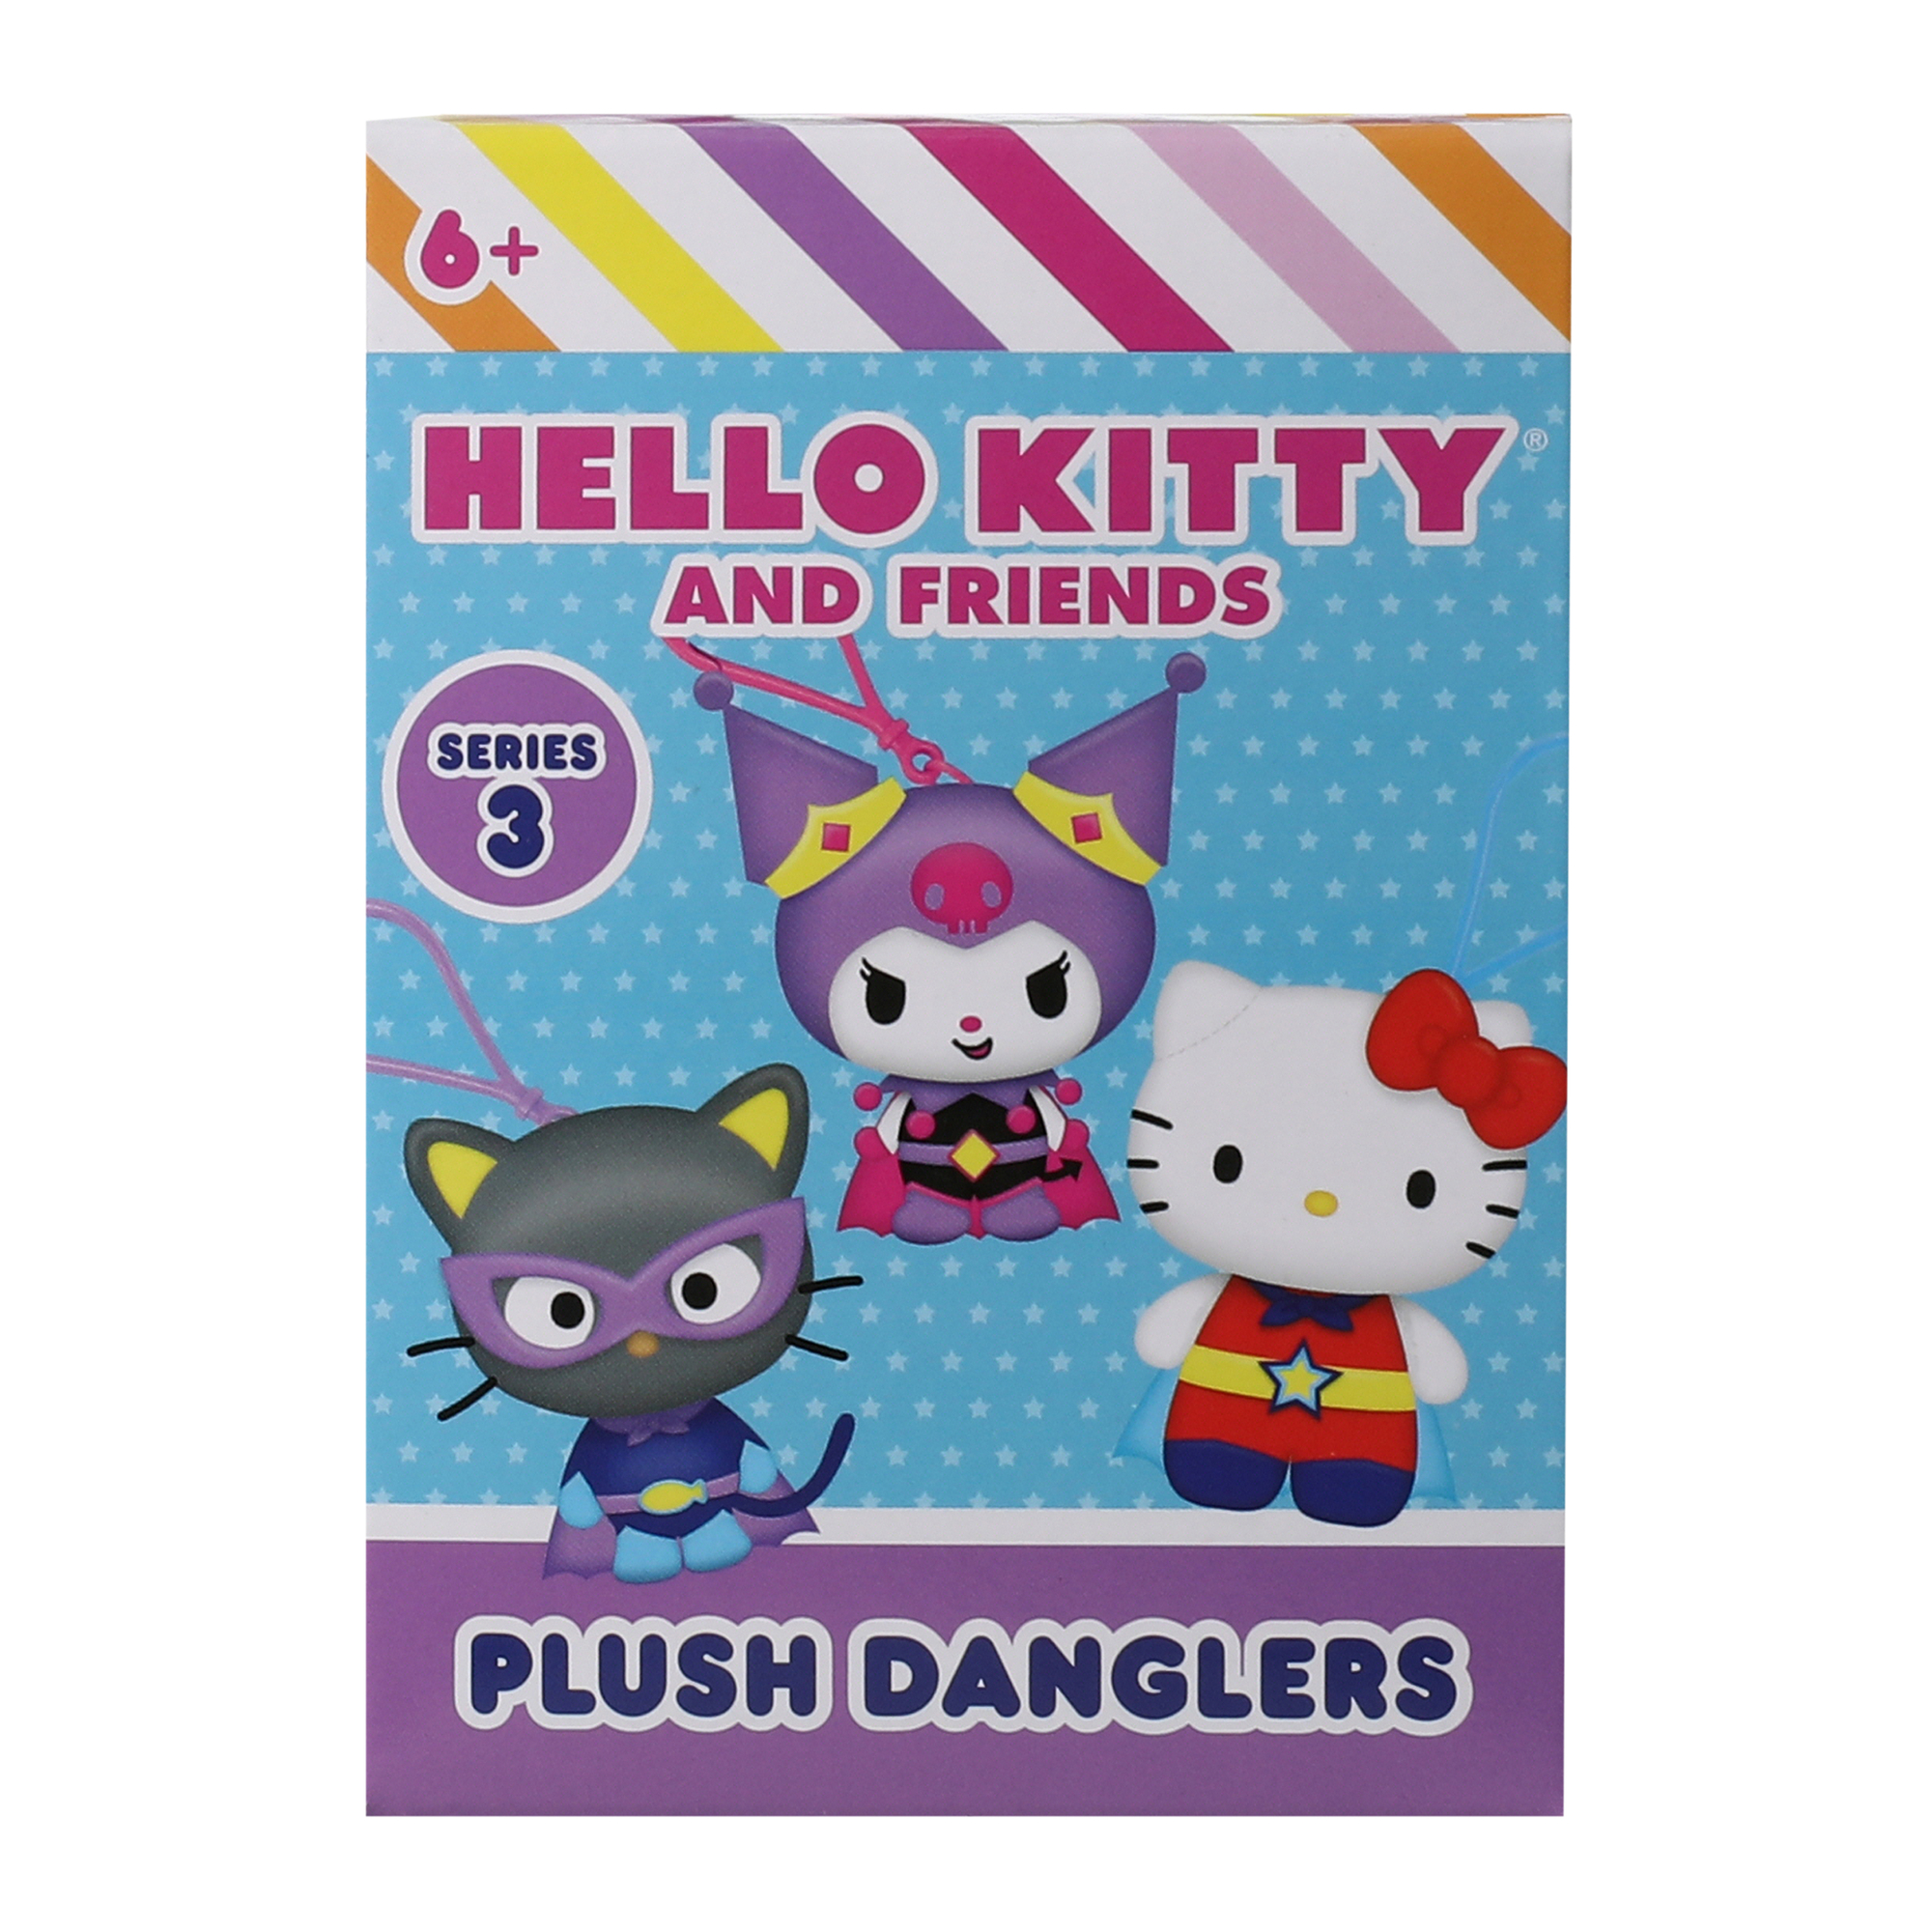 Hello Kitty Series 3 Plush Danglers - Complete Set of 6! New + Loose!